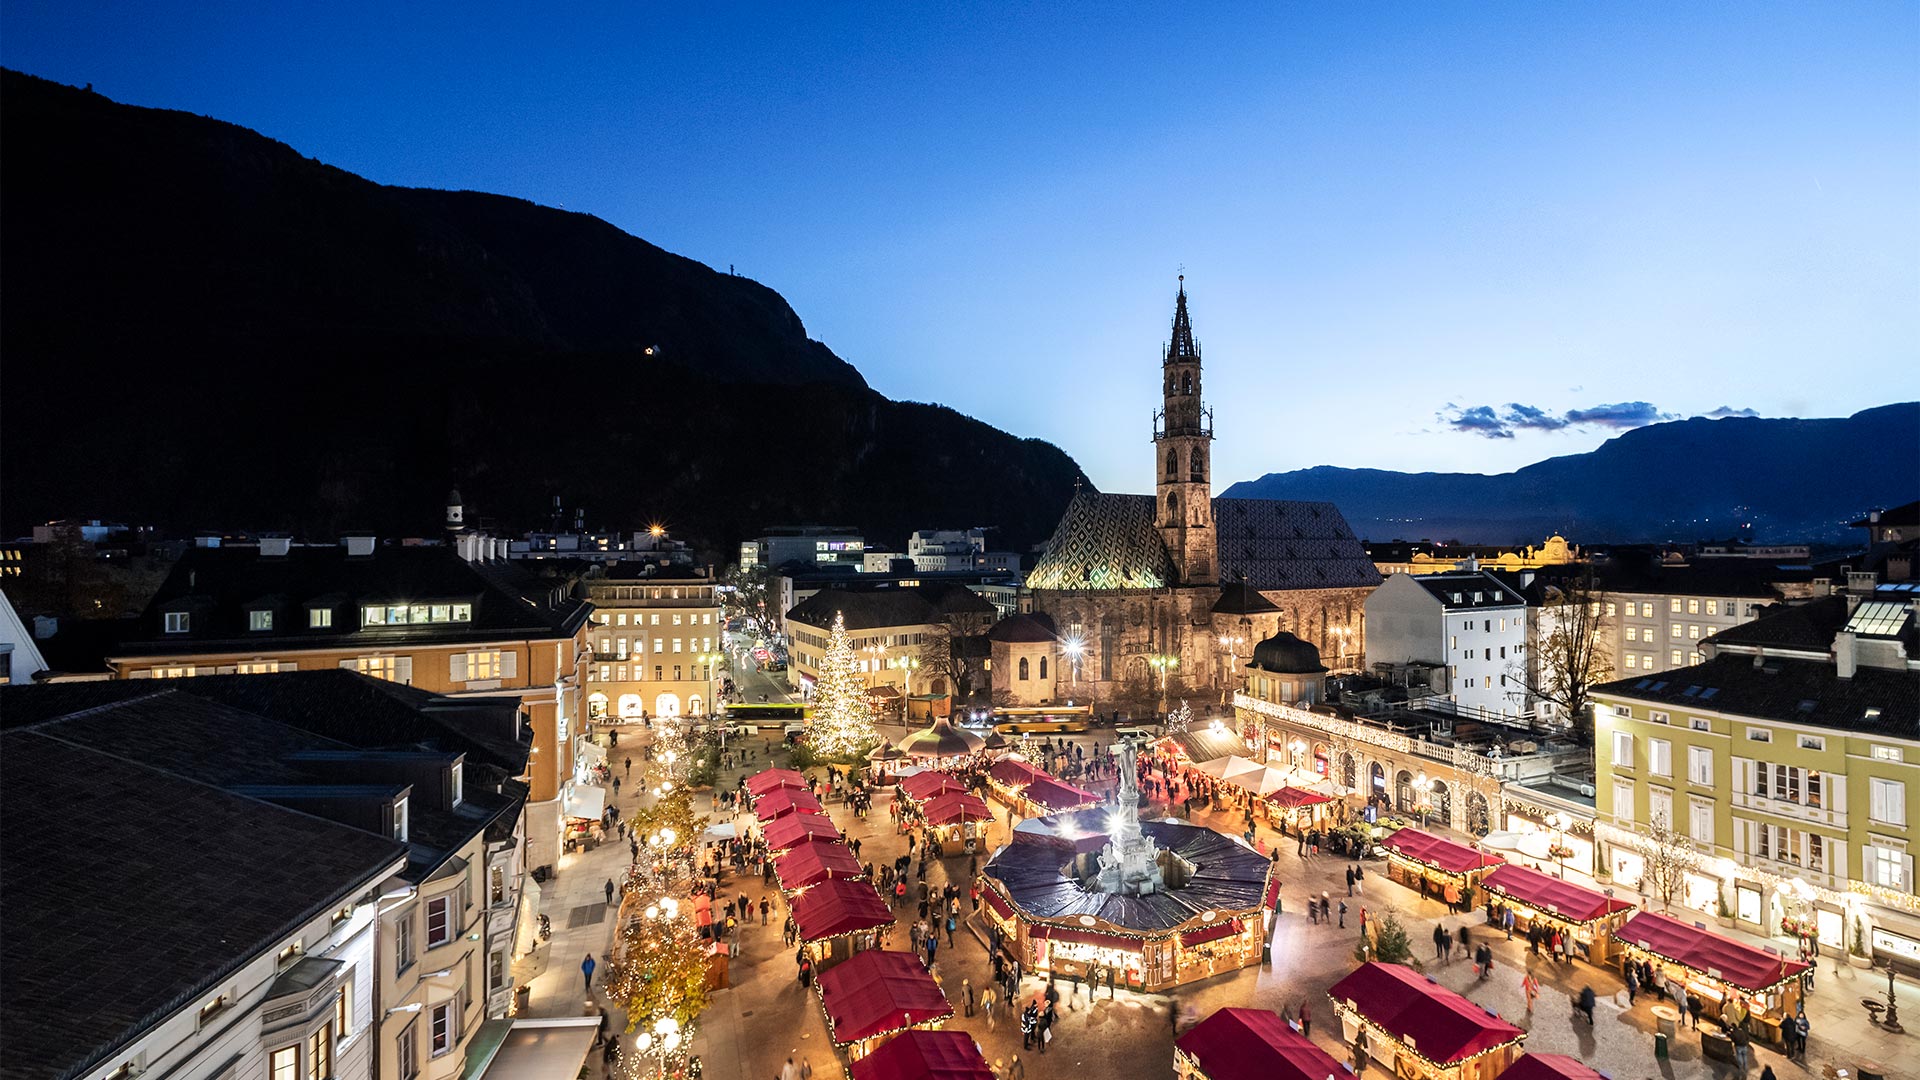 A bird's eye view of a traditional event on Piazza Walther on a winter's evening, where Christmas markets occupy the surface and crowds of shoppers are intent on shopping. 